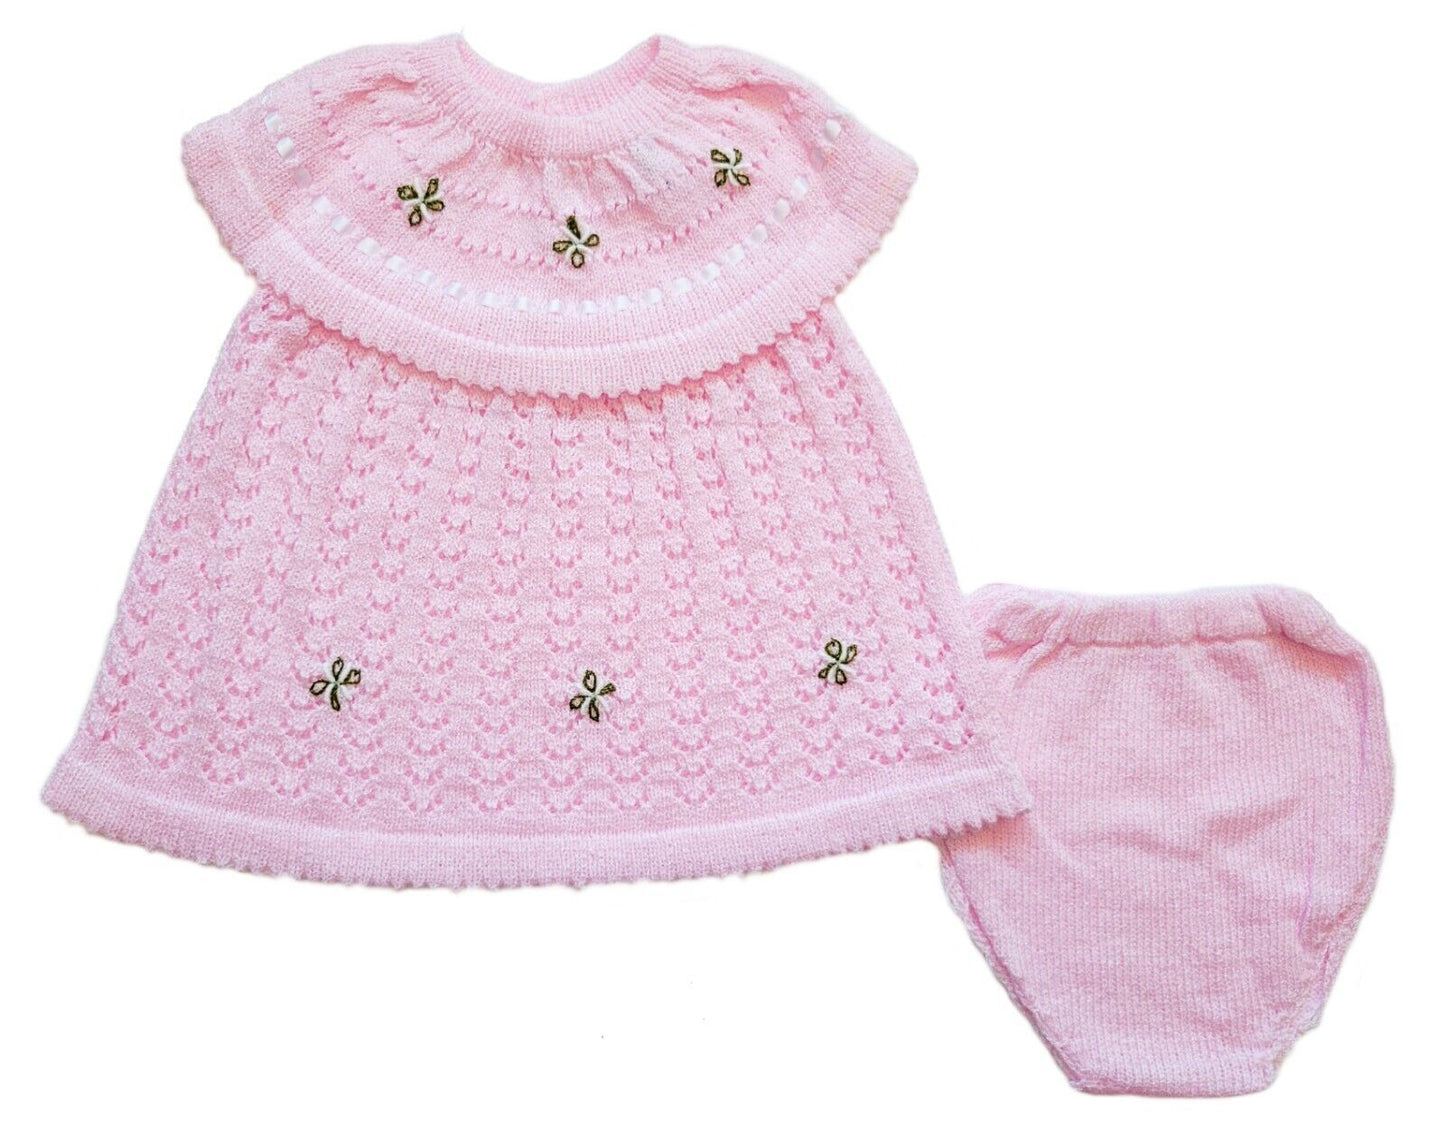 Wholesale Newborn Baby Girl Crochet Sweater Dress and Diaper Cover 2 Piece Outfit Set